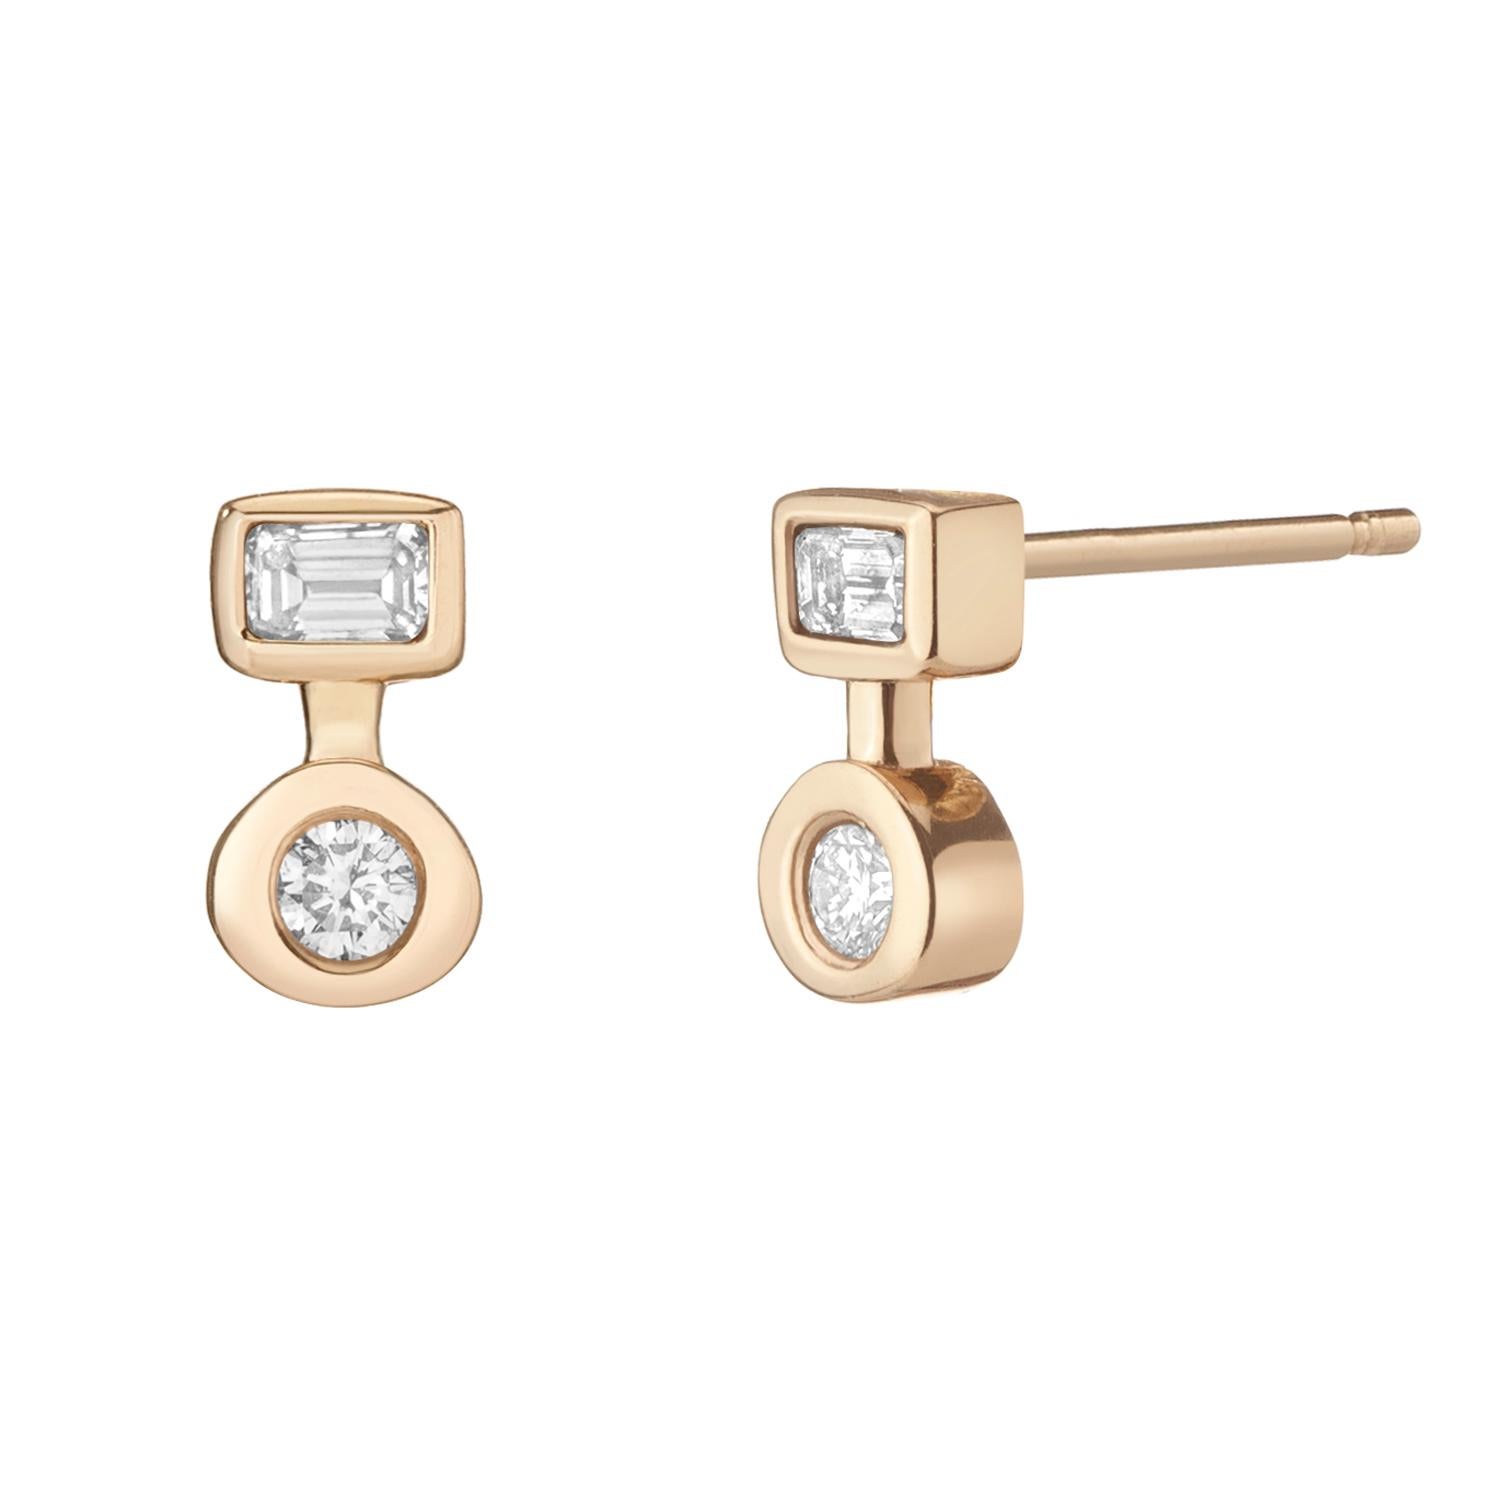 You don't have to choose between an Emerald Cut Diamond or Round Diamond, you can have both in an earring with these pair of not-so-basic studs!

These are great for brides or for daily wear along with your favorite earrings.

Inspired by seeing the